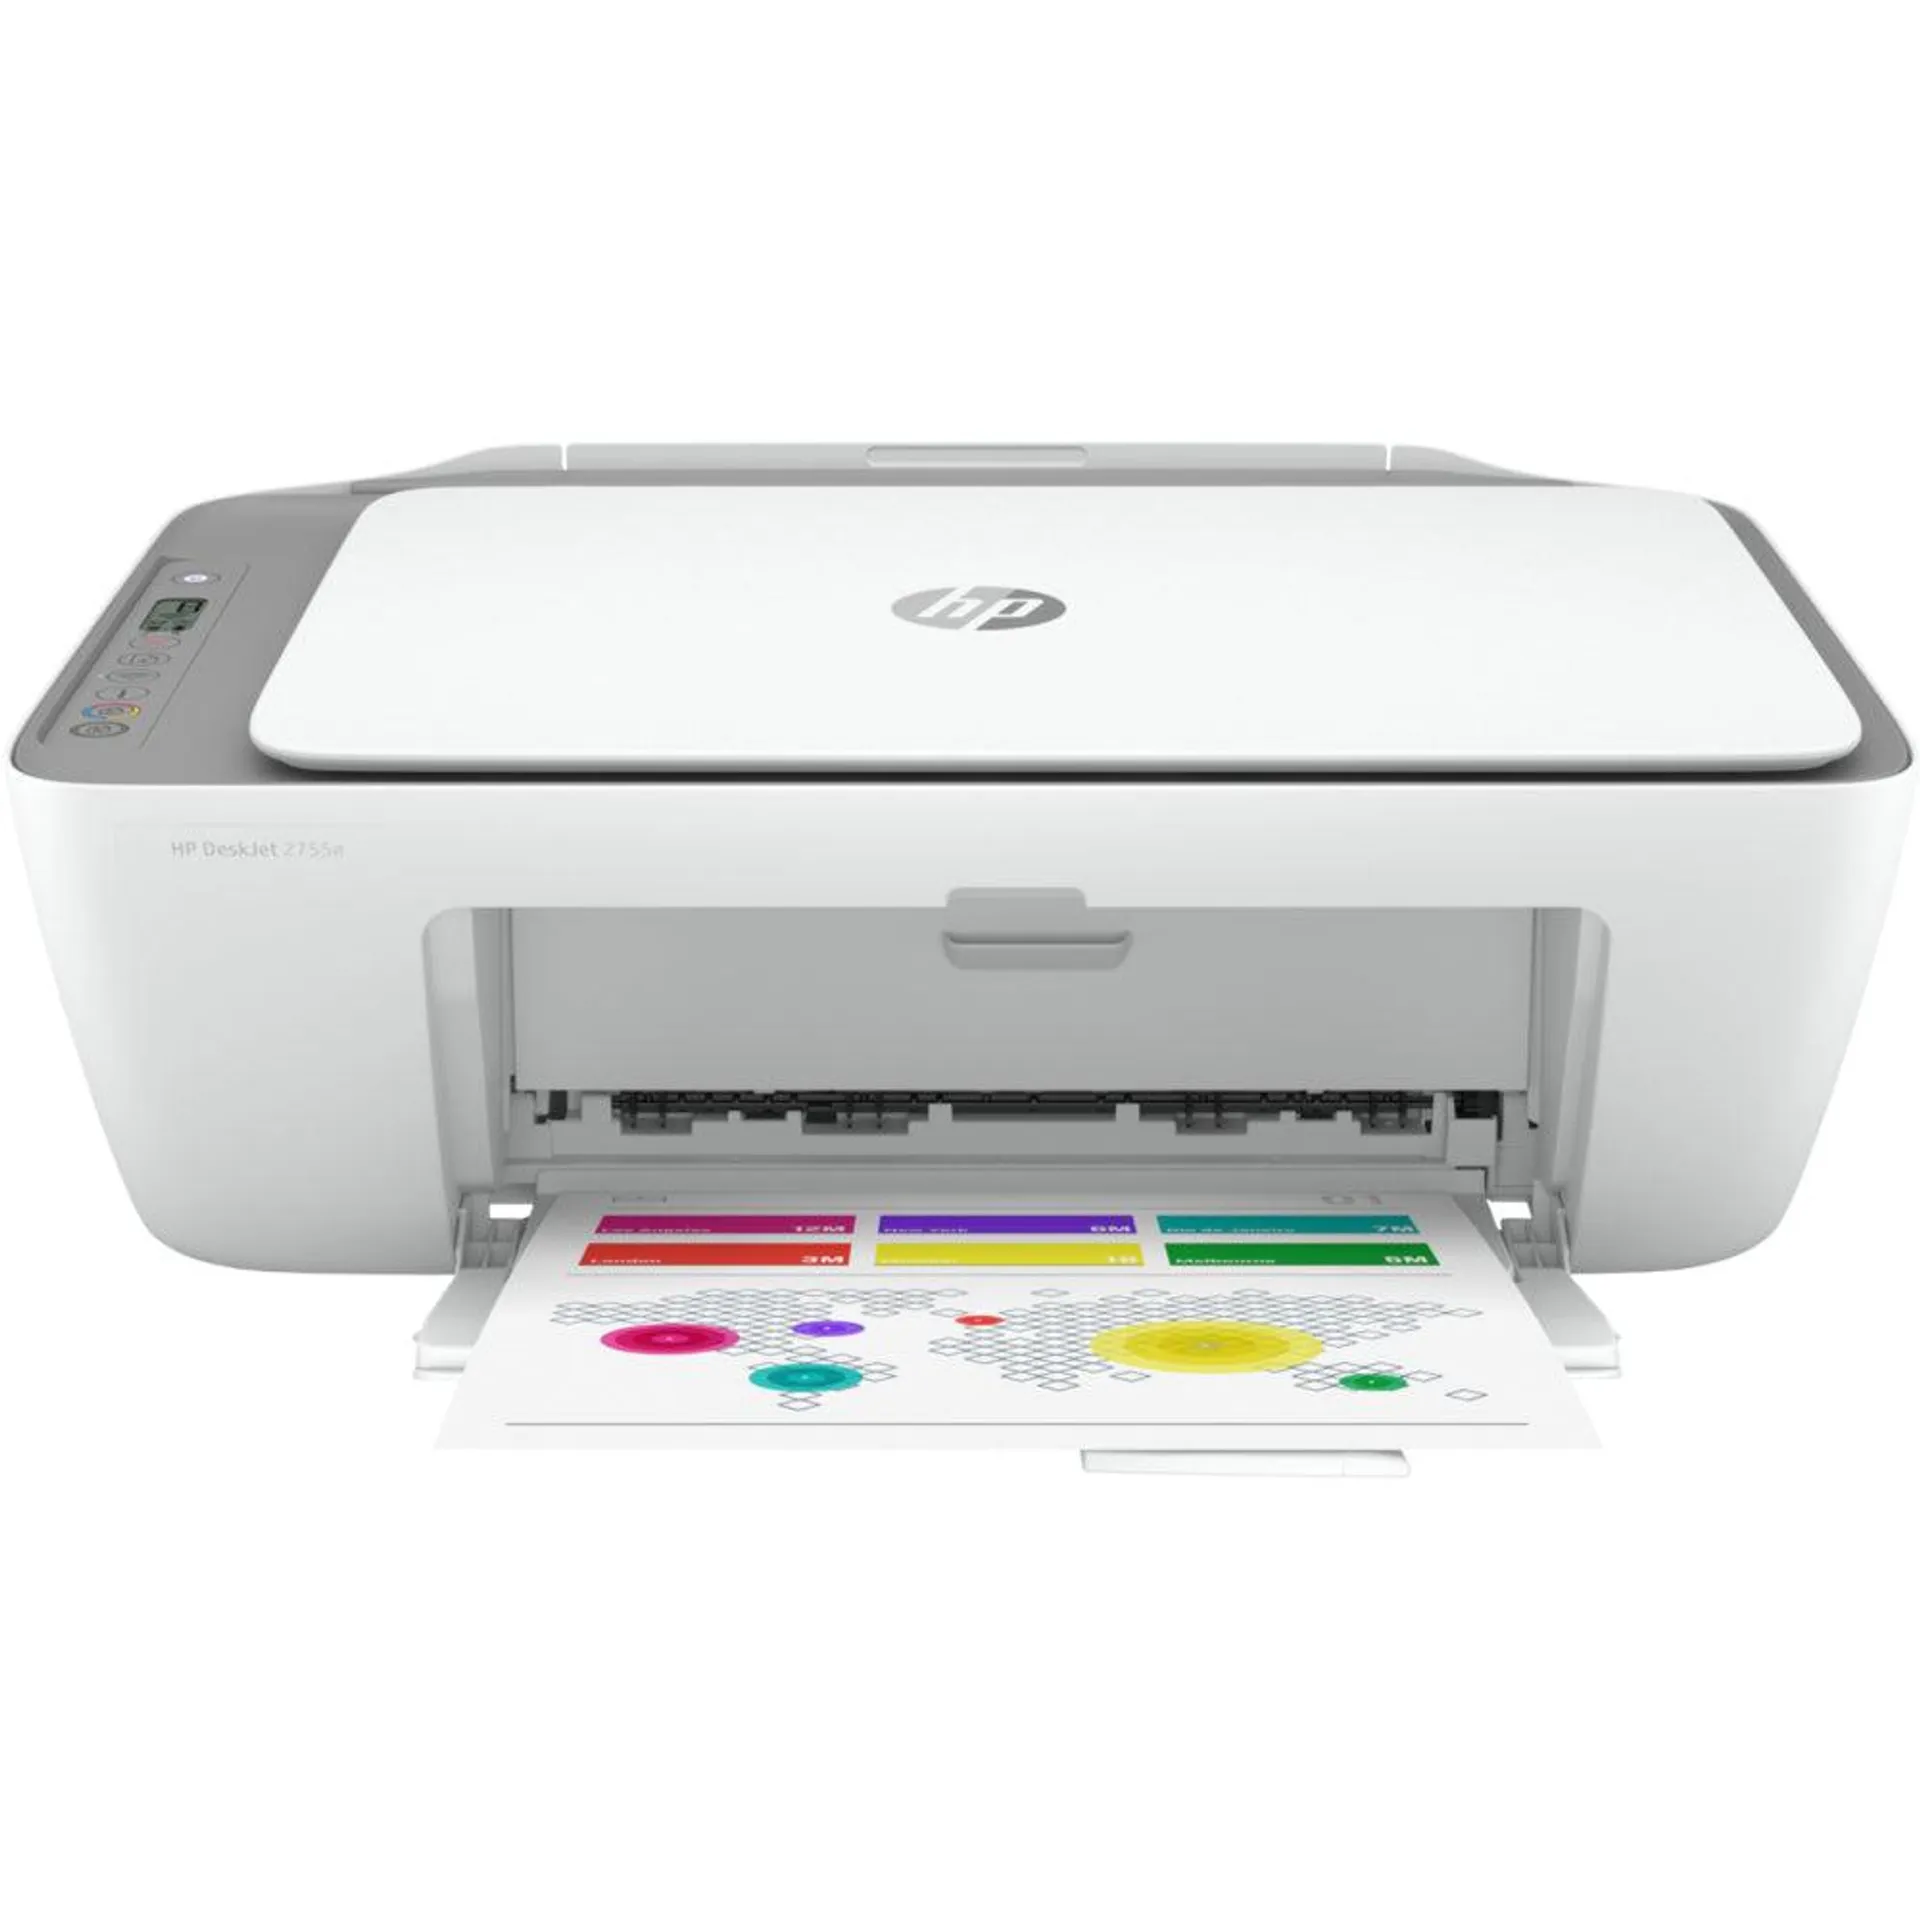 HP DeskJet 2755e All-in-One InkJet Printer with bonus 6 months Instant Ink with HP+